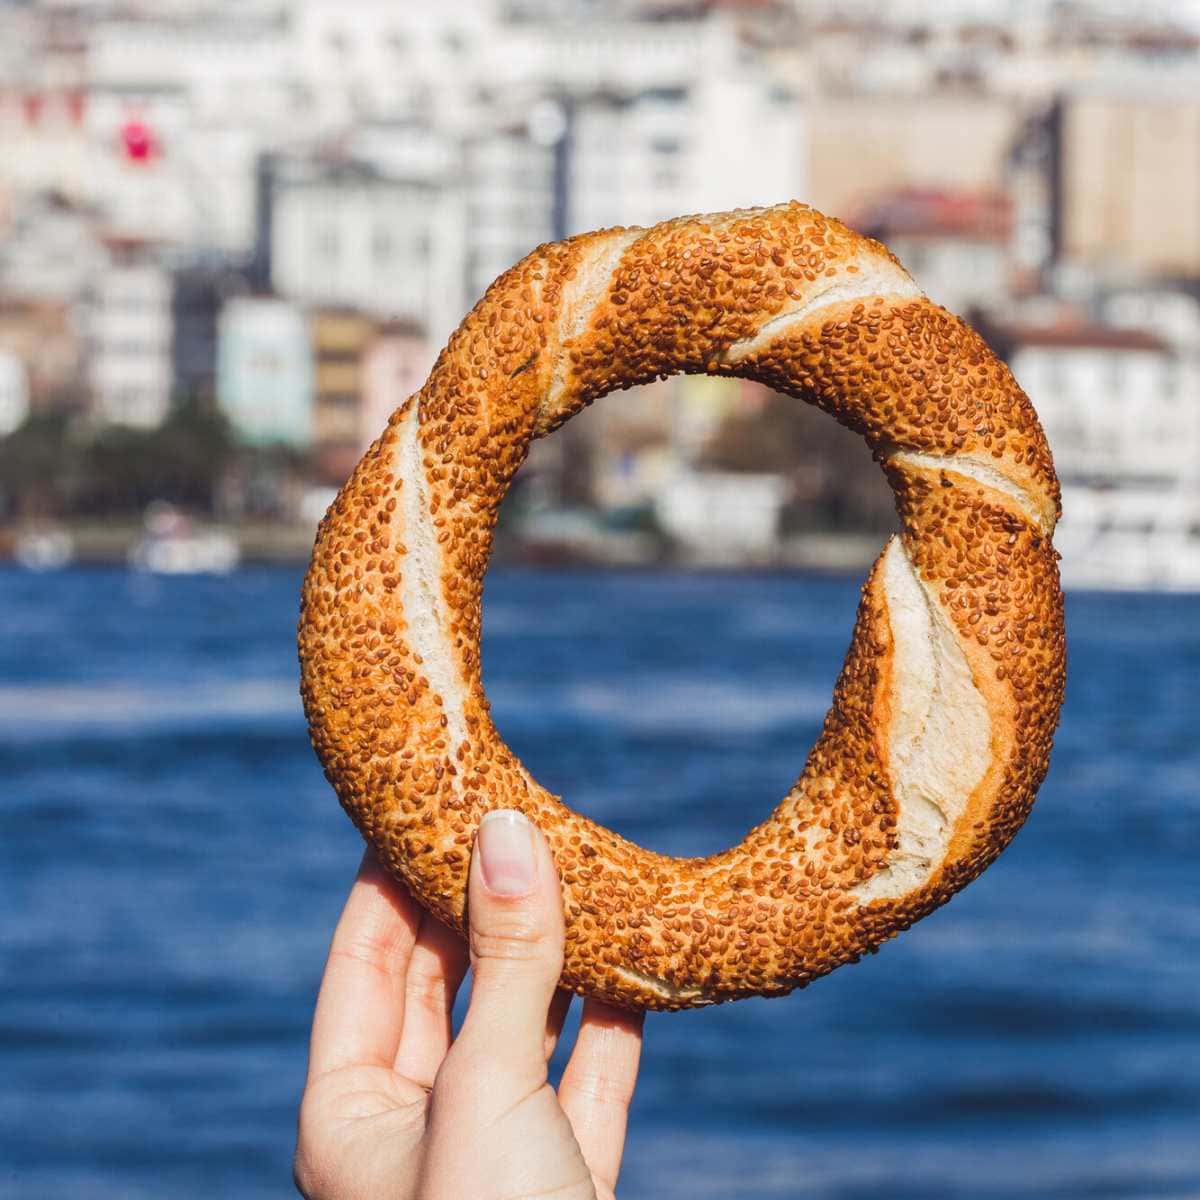 A hand holding a turkish simit.